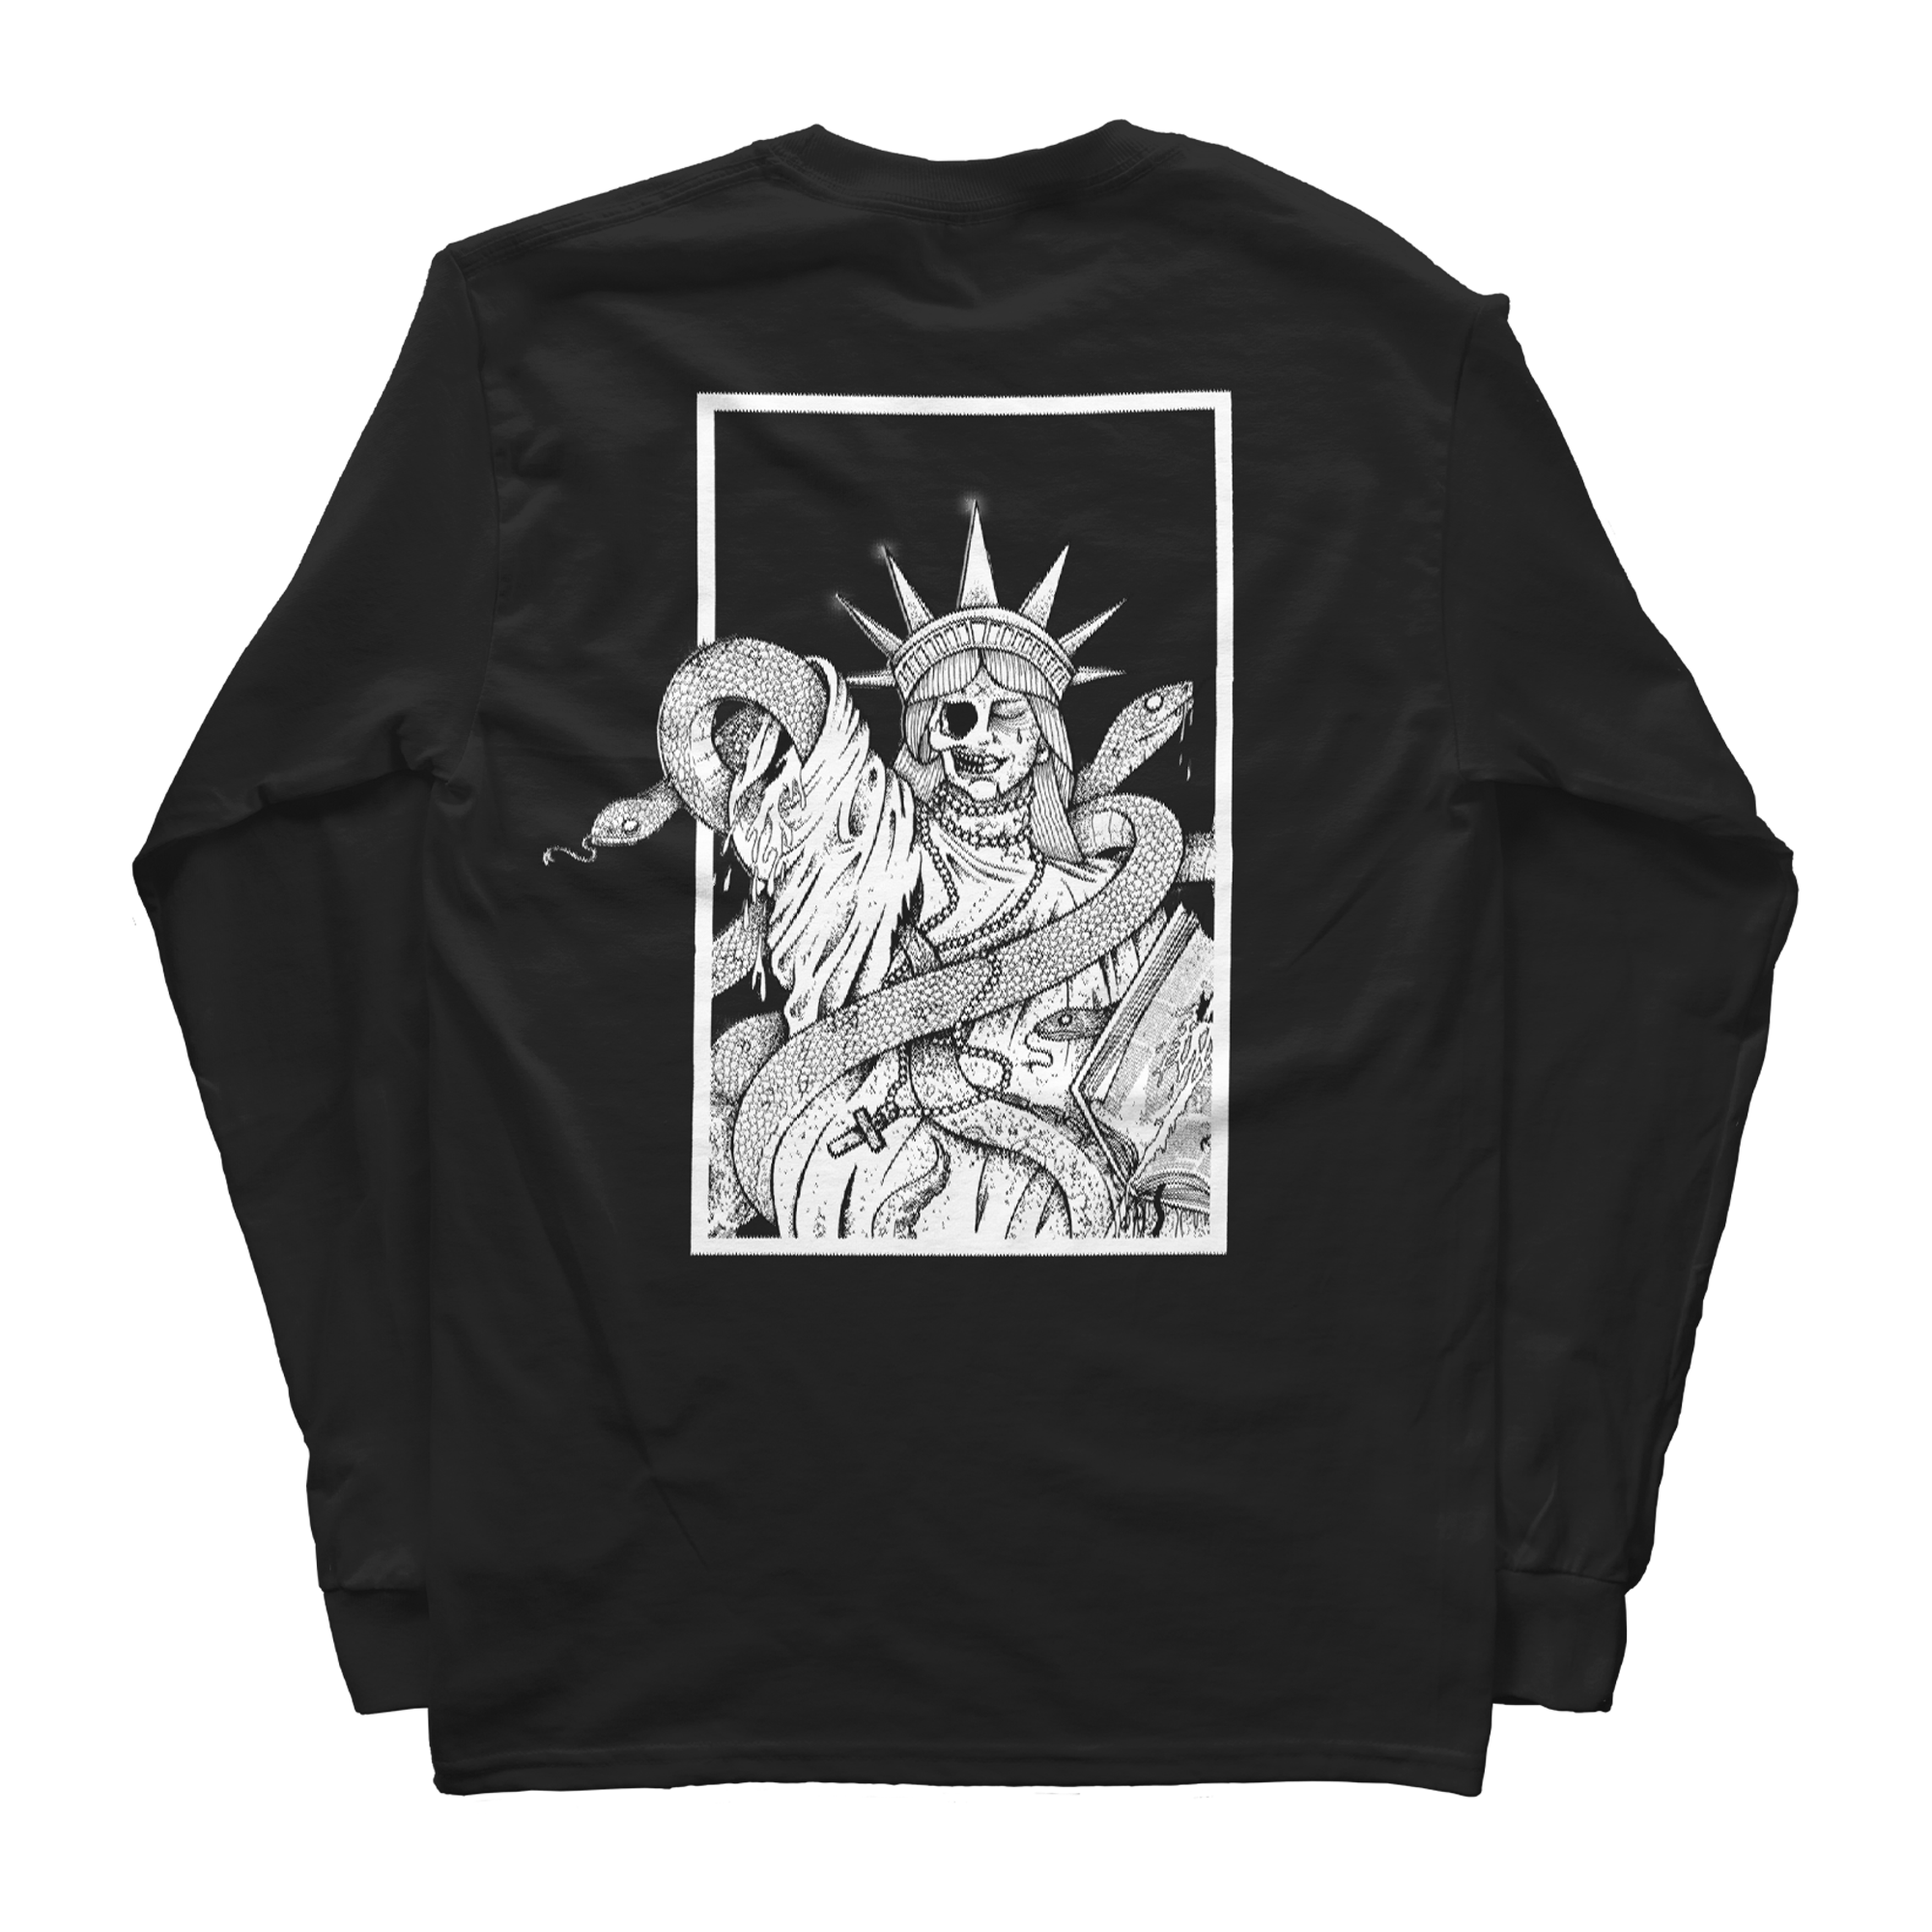 This is Hell - Statue of Liberty Long Sleeve